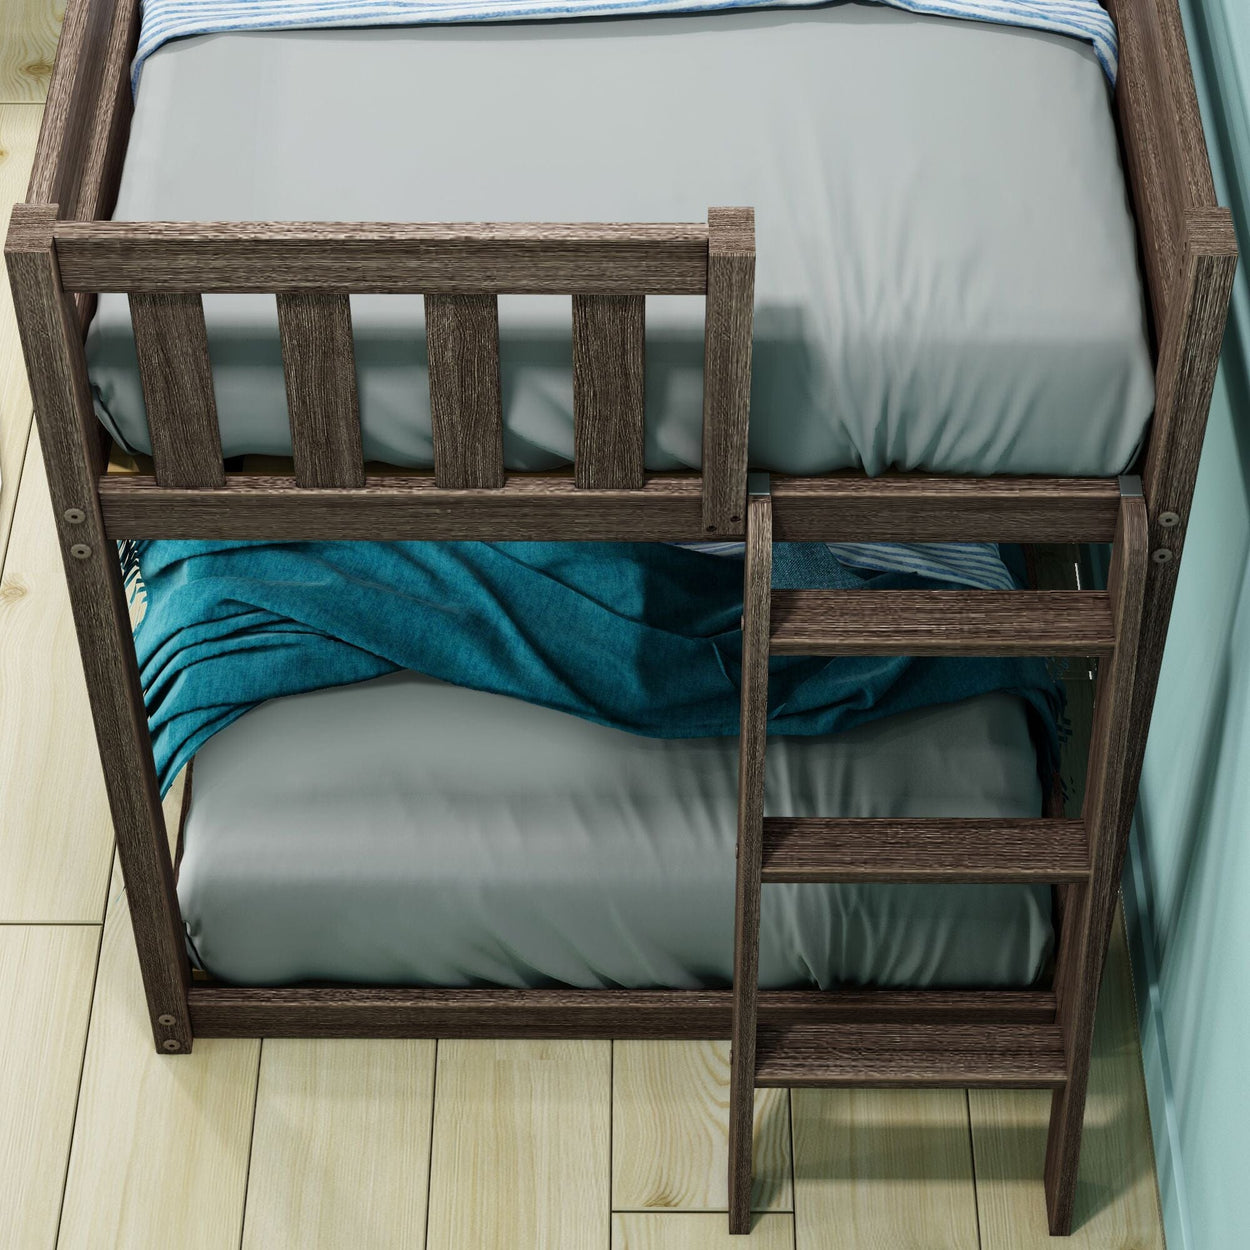 185320-151 : Bunk Beds Twin over Twin Low Bunk Bed with Ladder on End, Clay